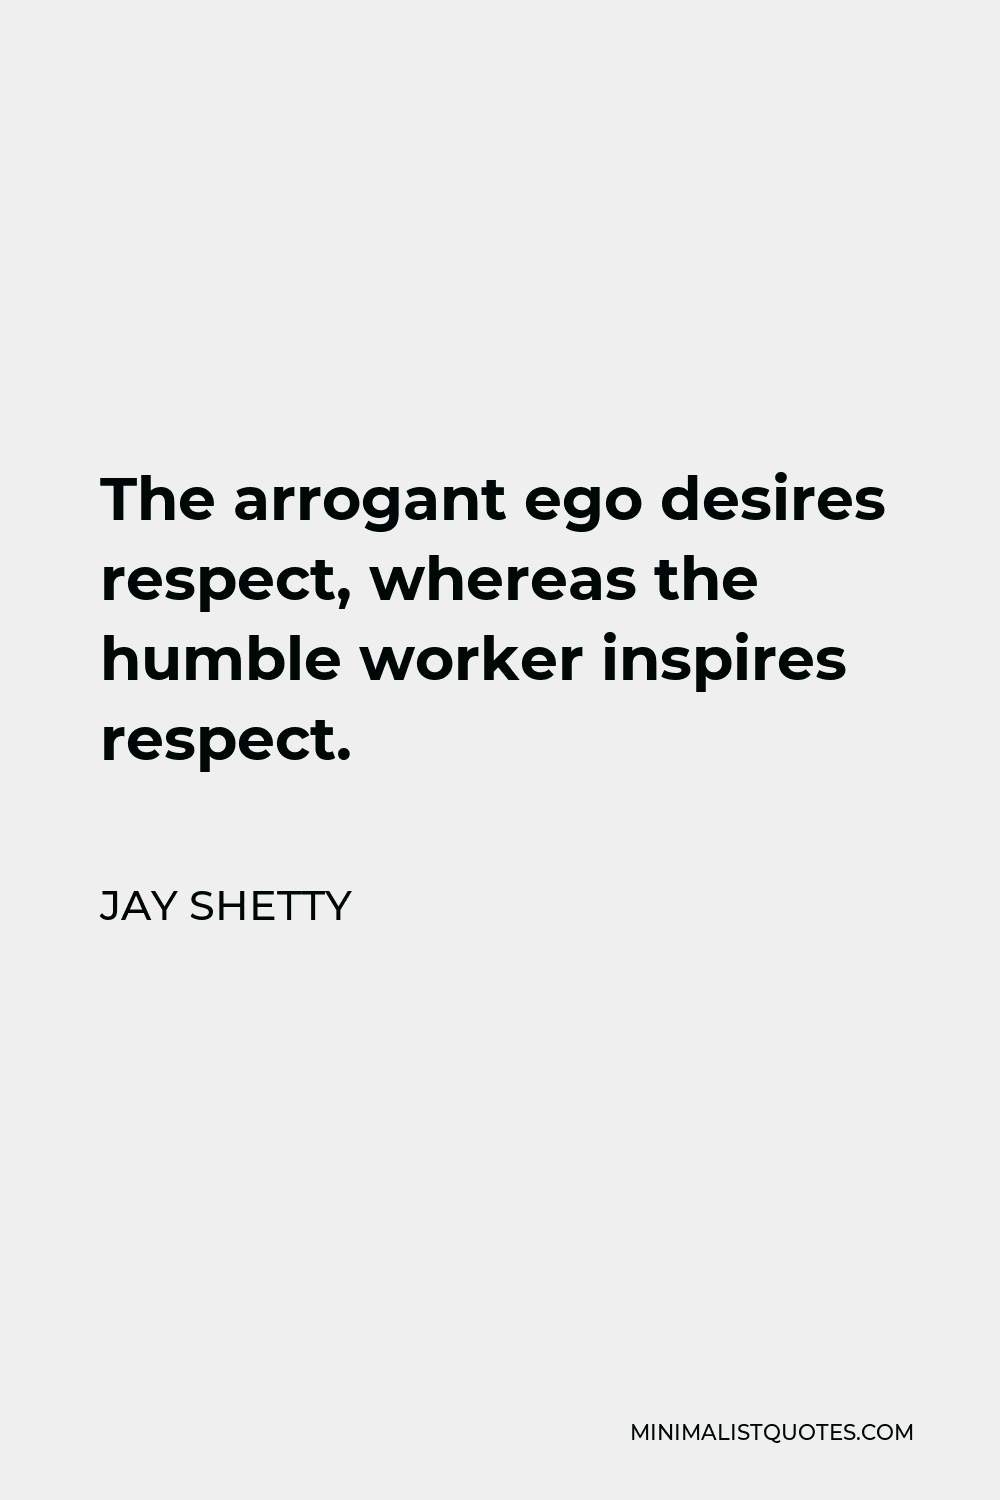 Jay Shetty Quote - The arrogant ego desires respect, whereas the humble worker inspires respect.